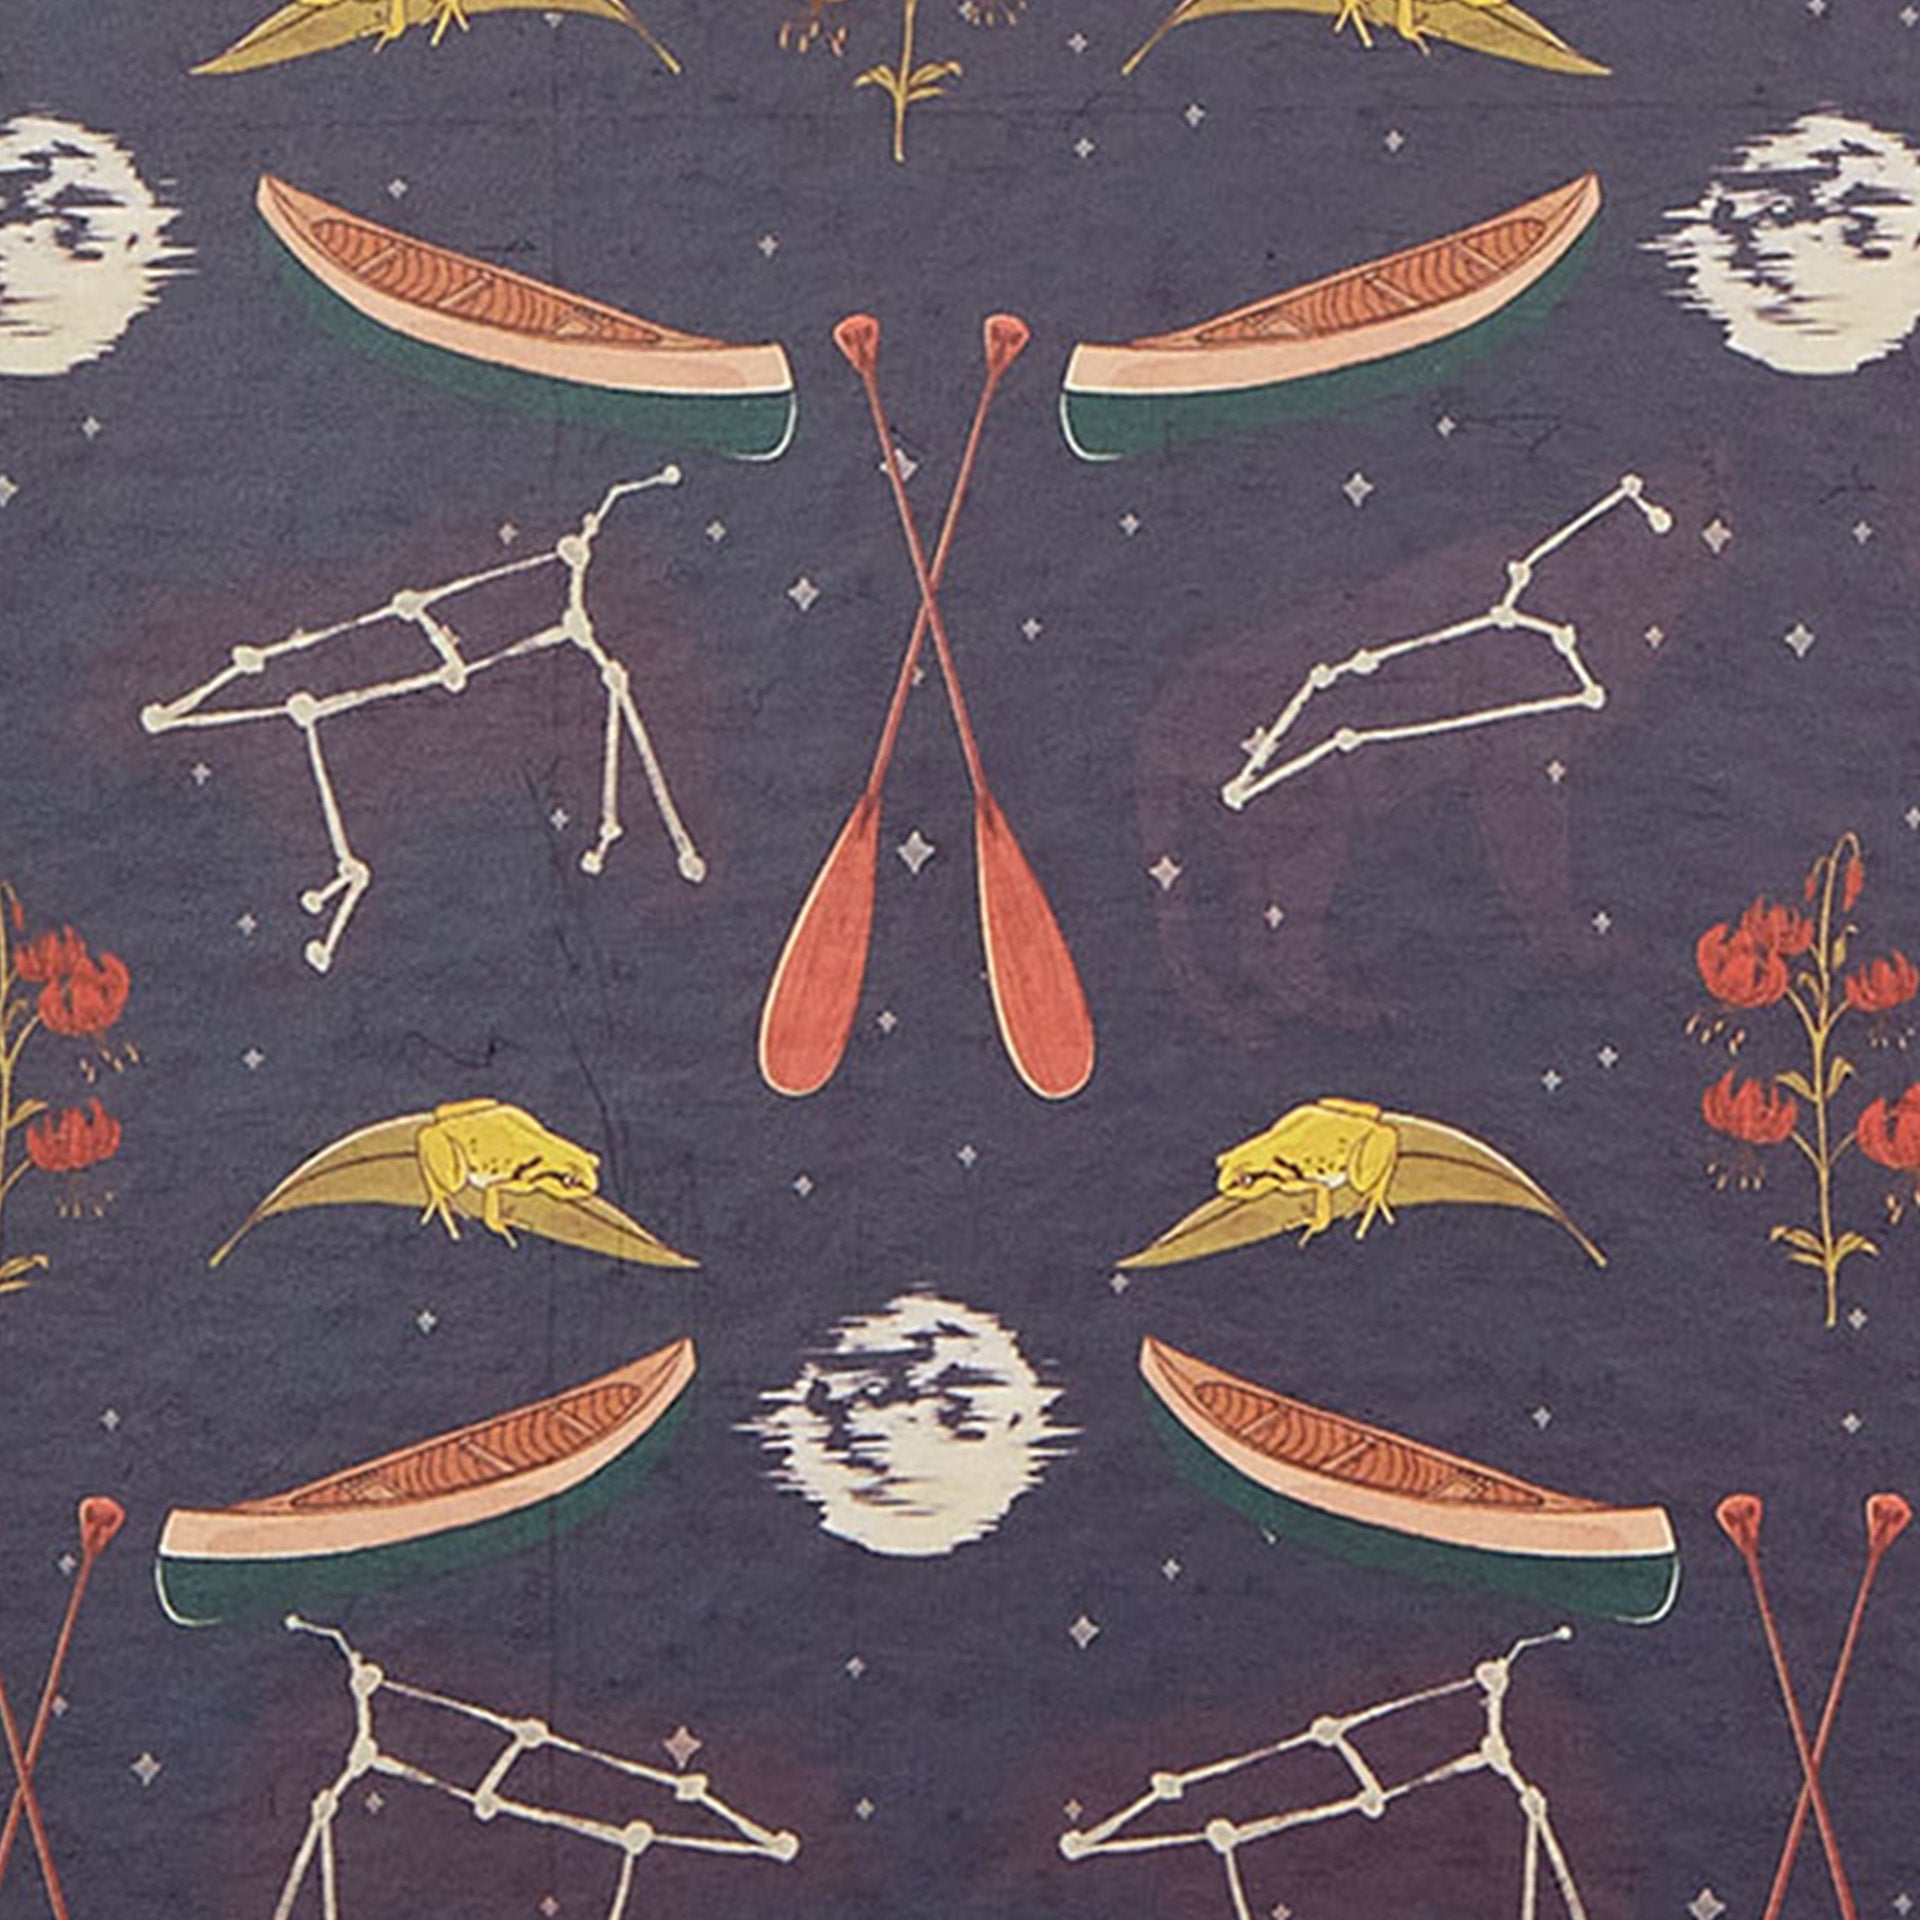 Closeup of printed canoes and constellations